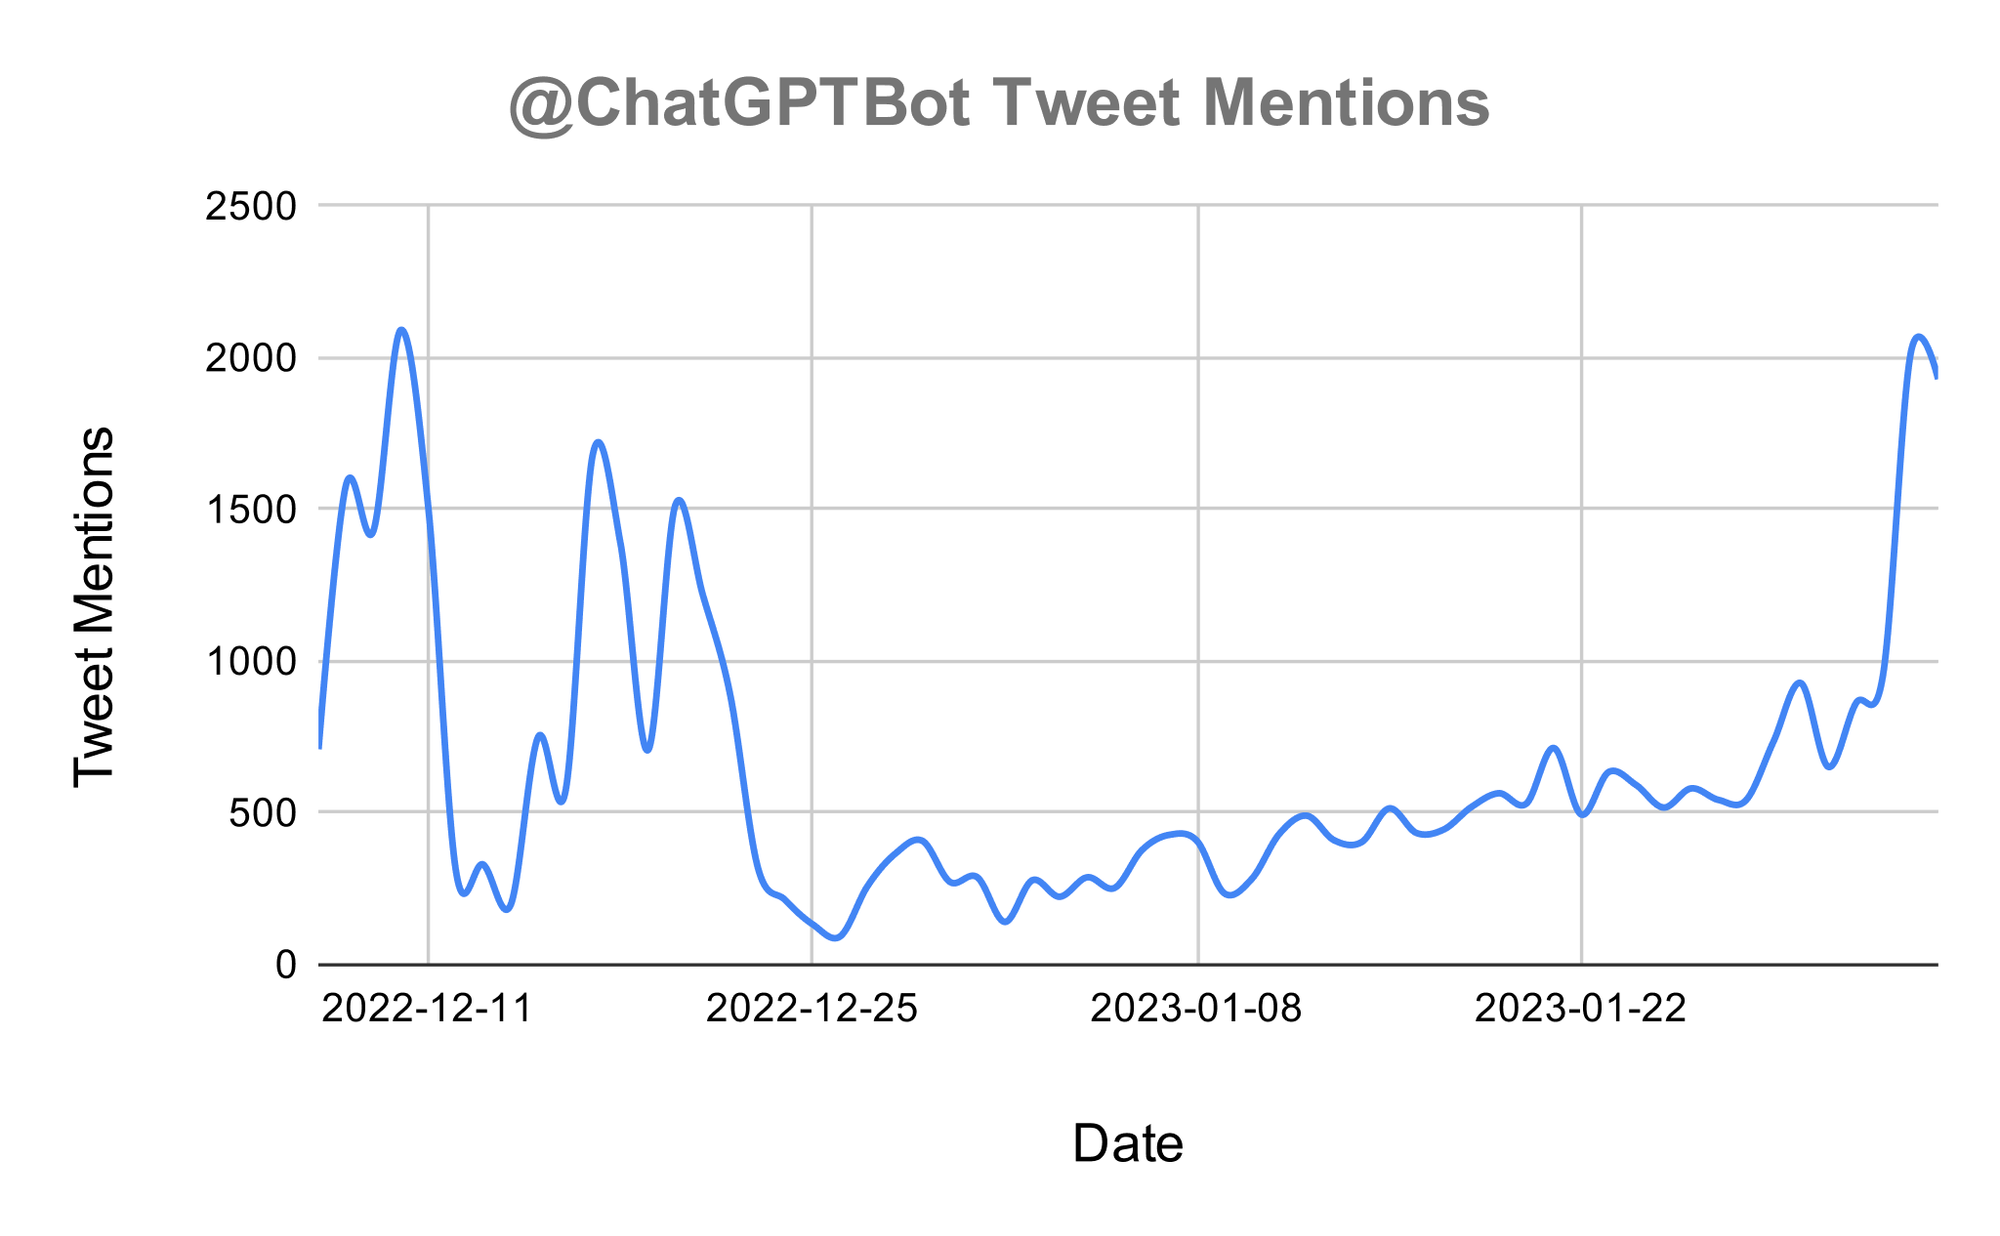 Number of mentions of @ChatGPTBot per day over the past two months. The major downward spikes are explained below. Data starts on 12/7/2022, because prior to that I wasn’t storing conversations in Redis.